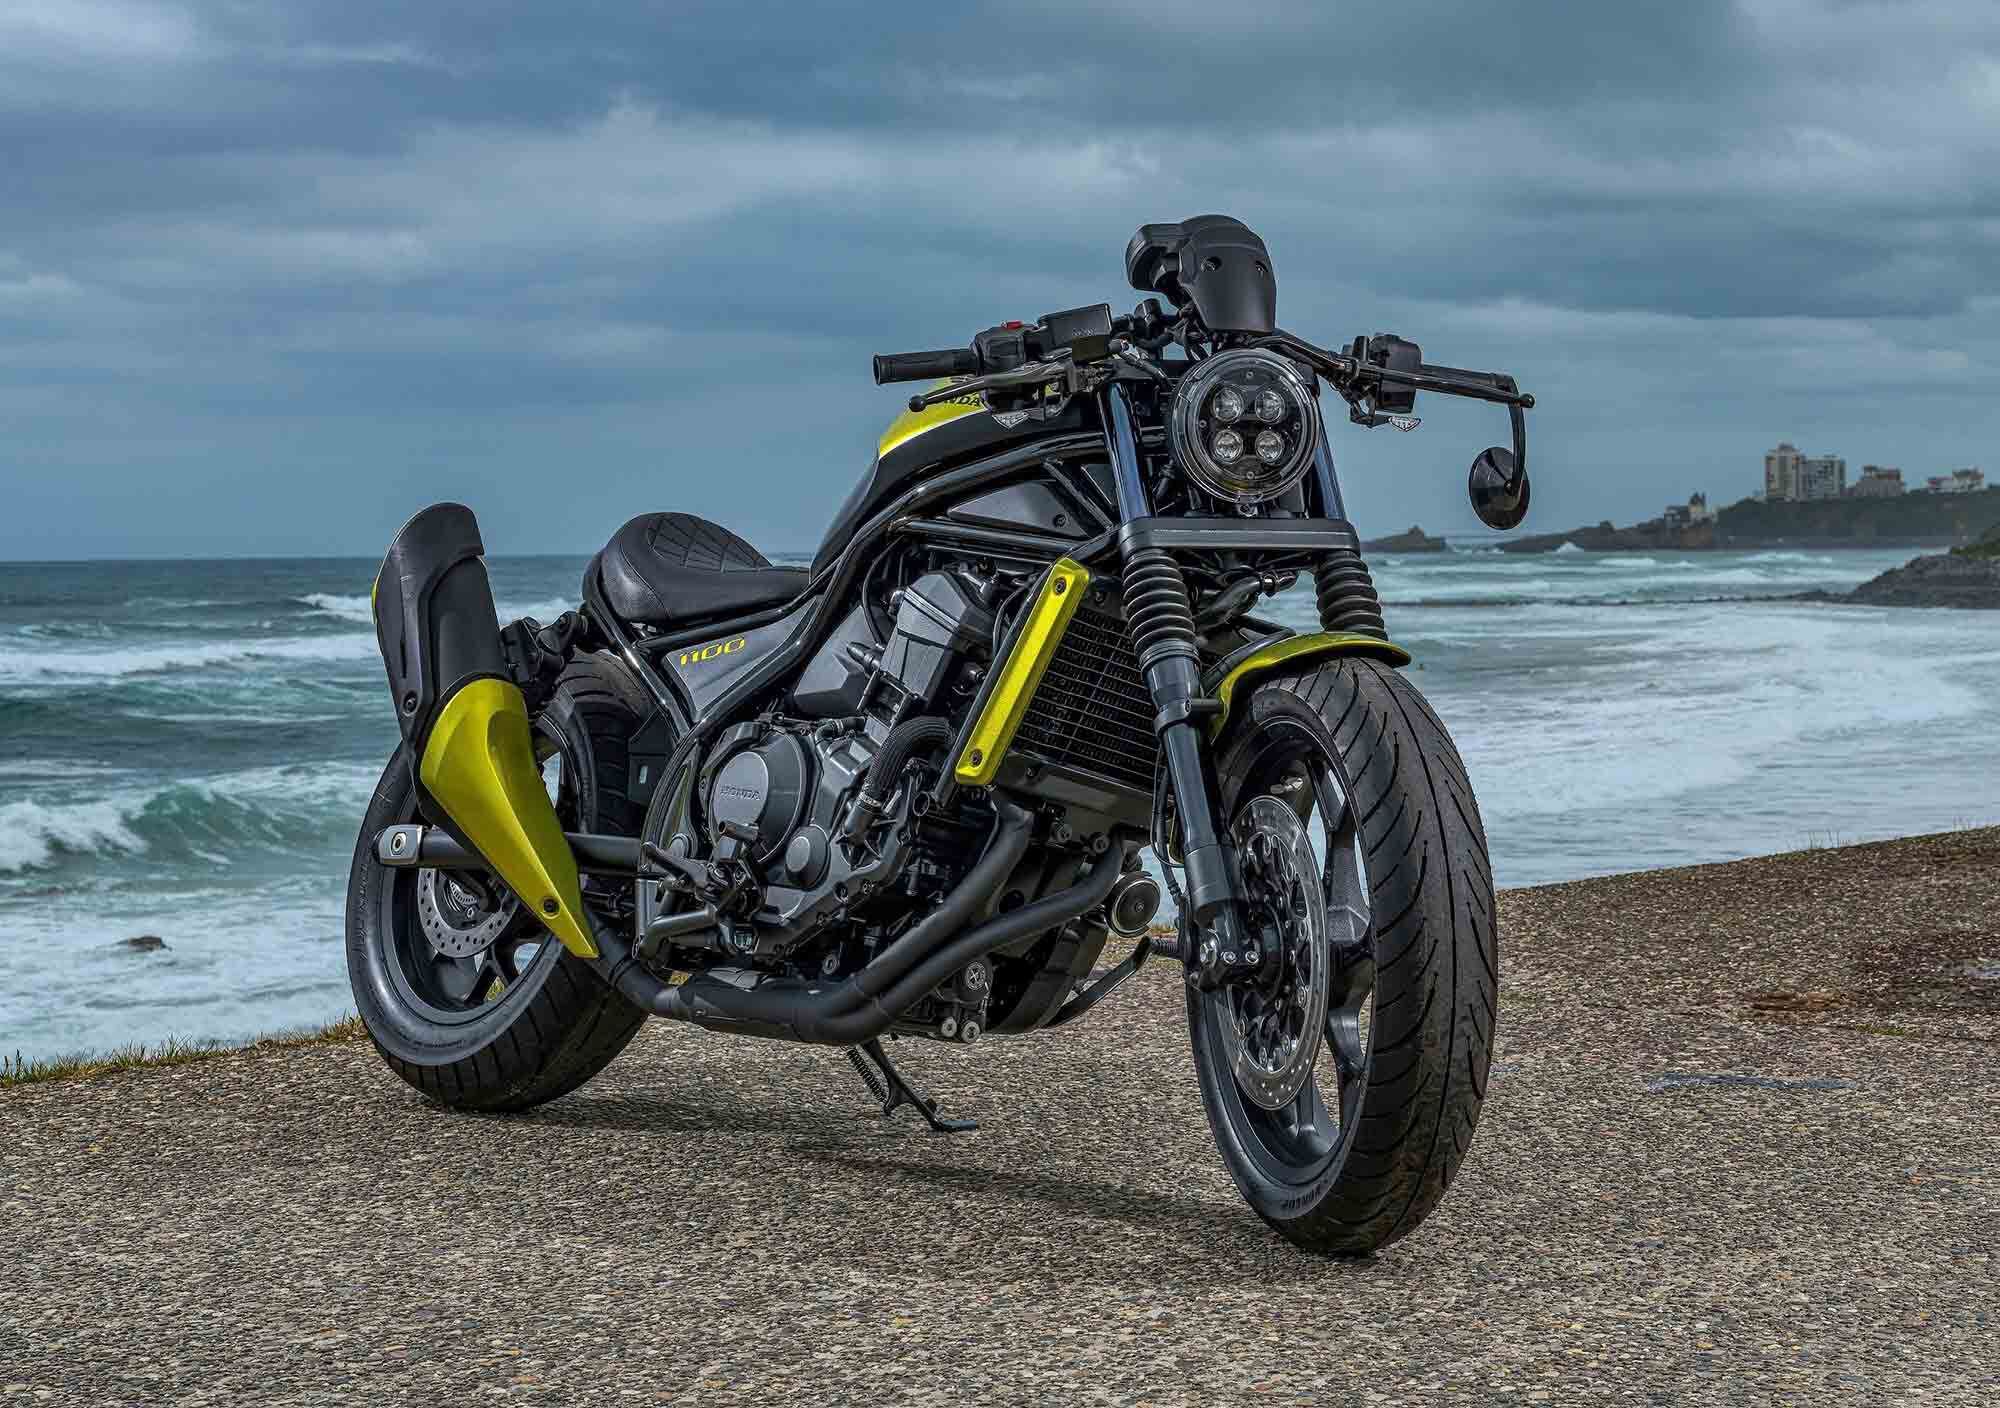 The winning entry in the Best Metric group was this angular Ducati Scrambler by MC Cycles.